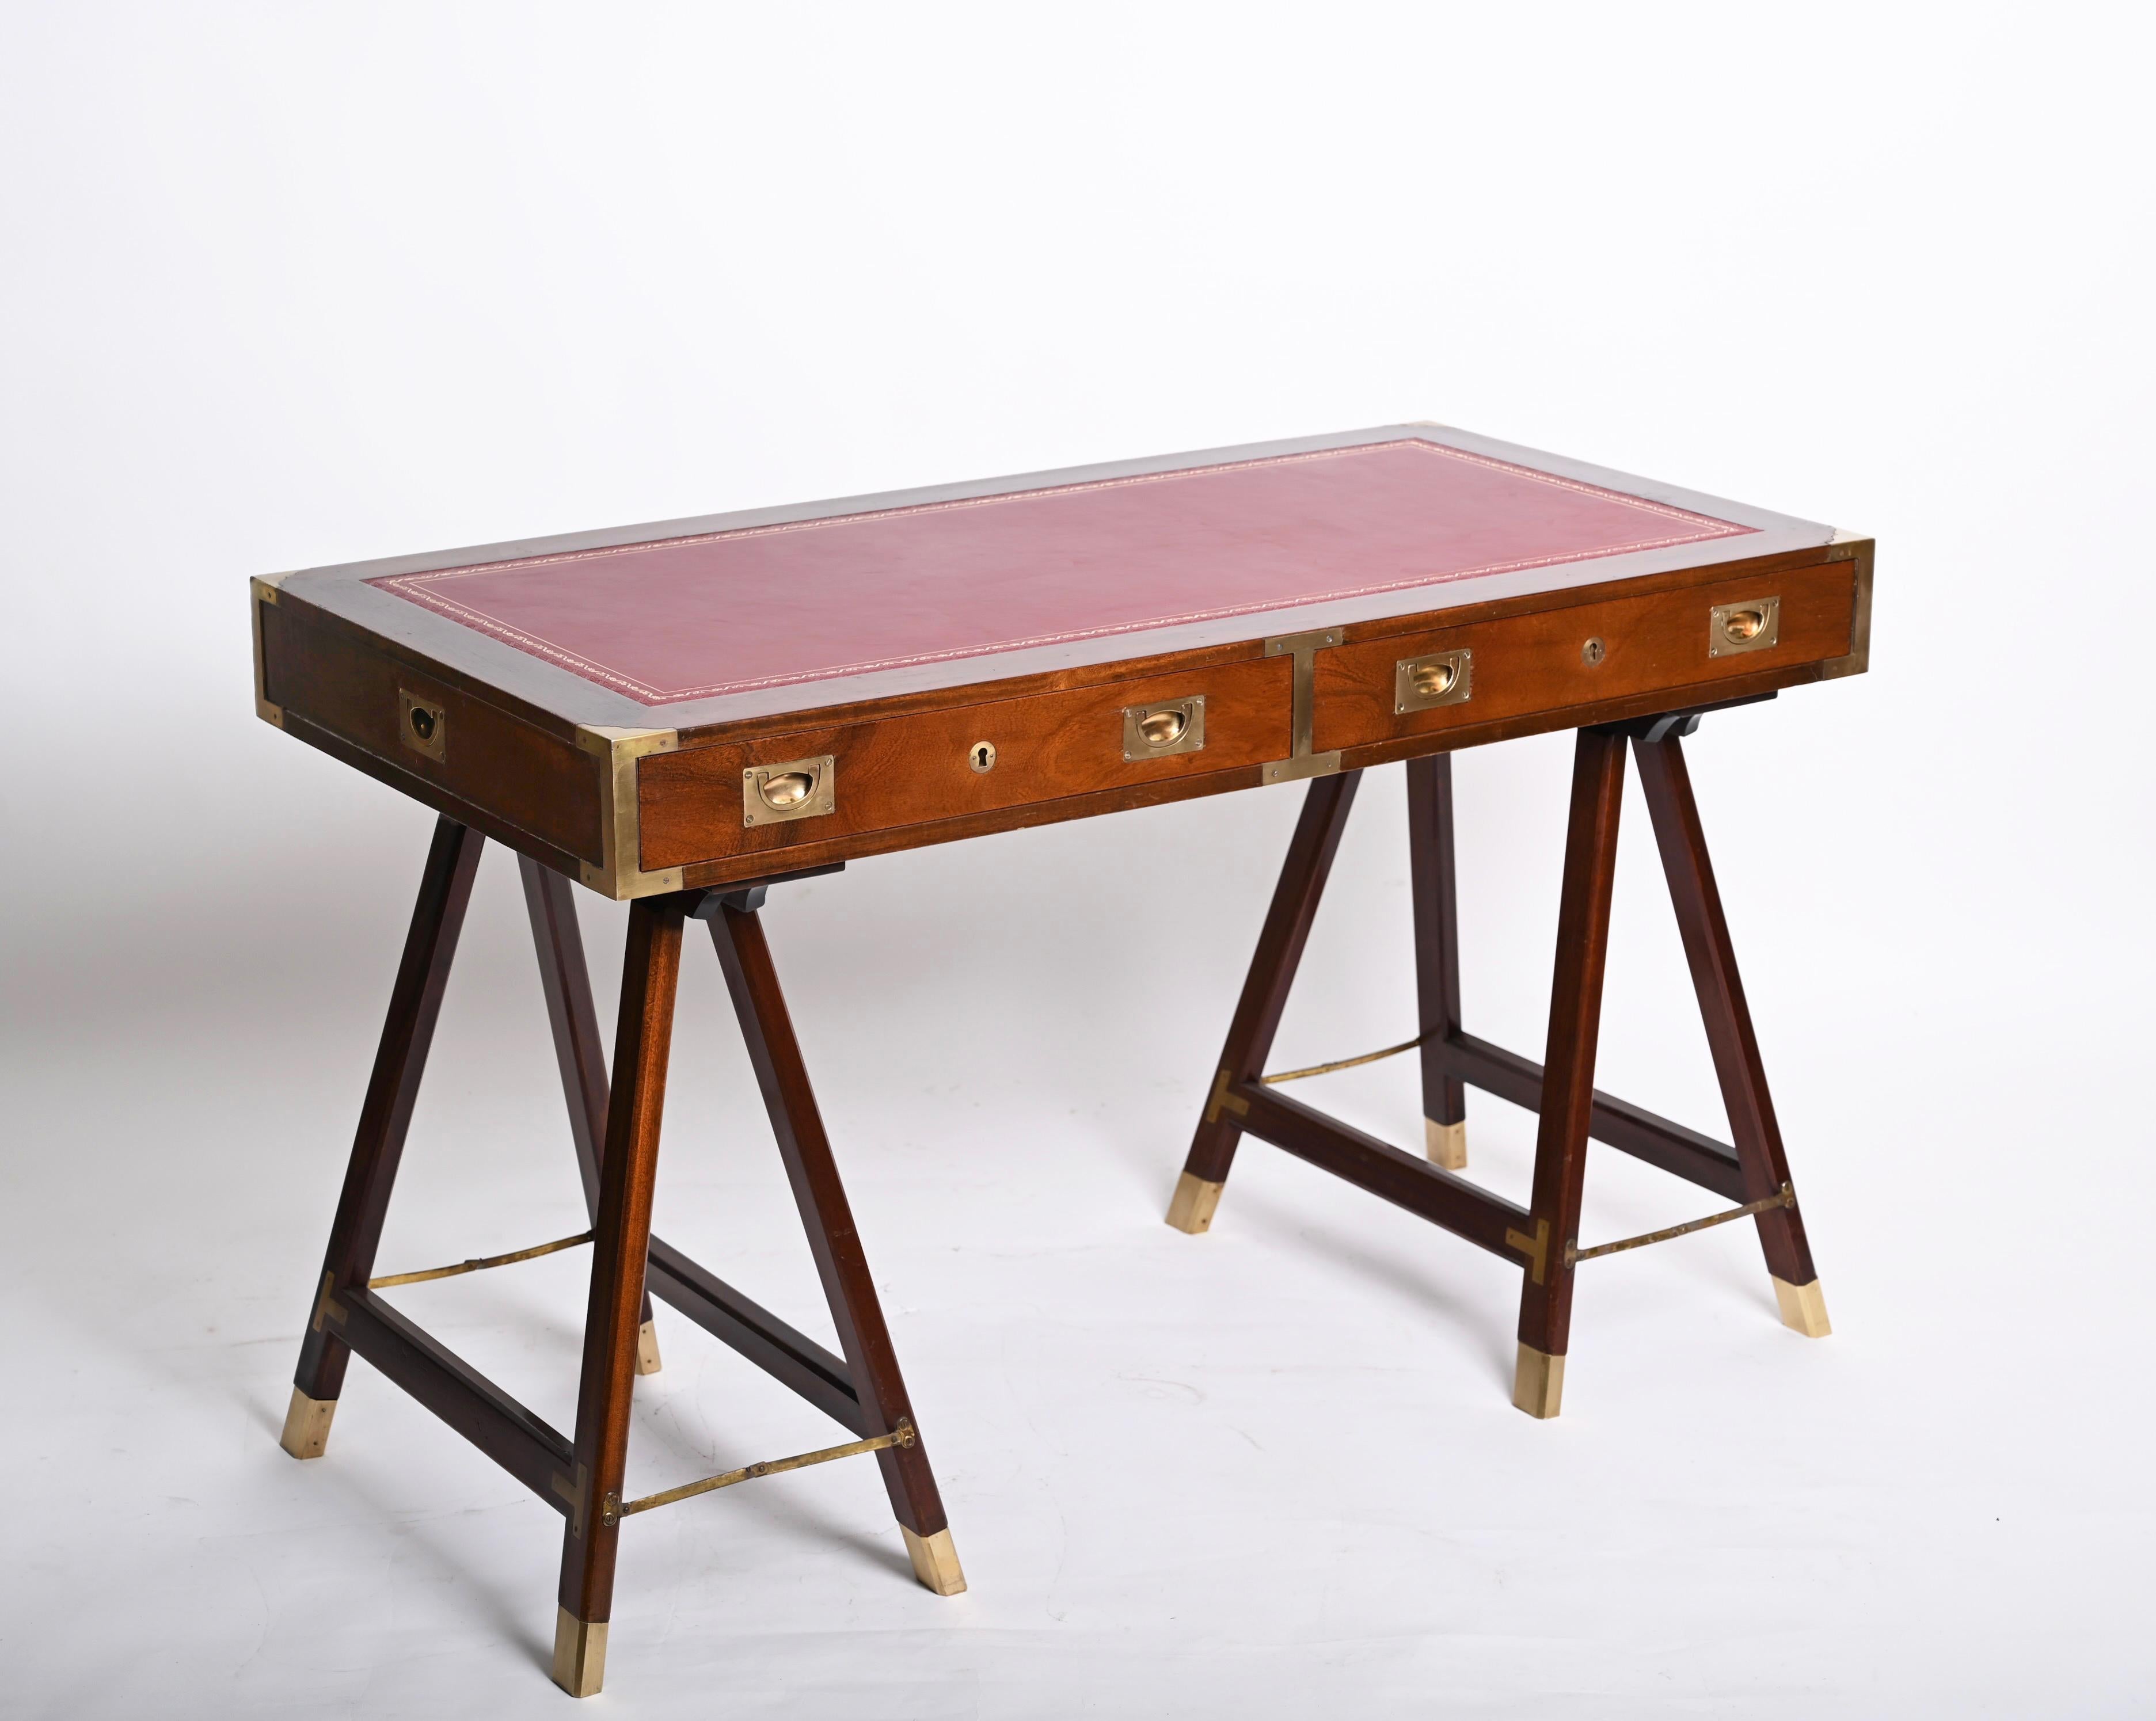 Walnut Midcentury English Military Style Wood and Brass Desk with Leather Top, 1960s